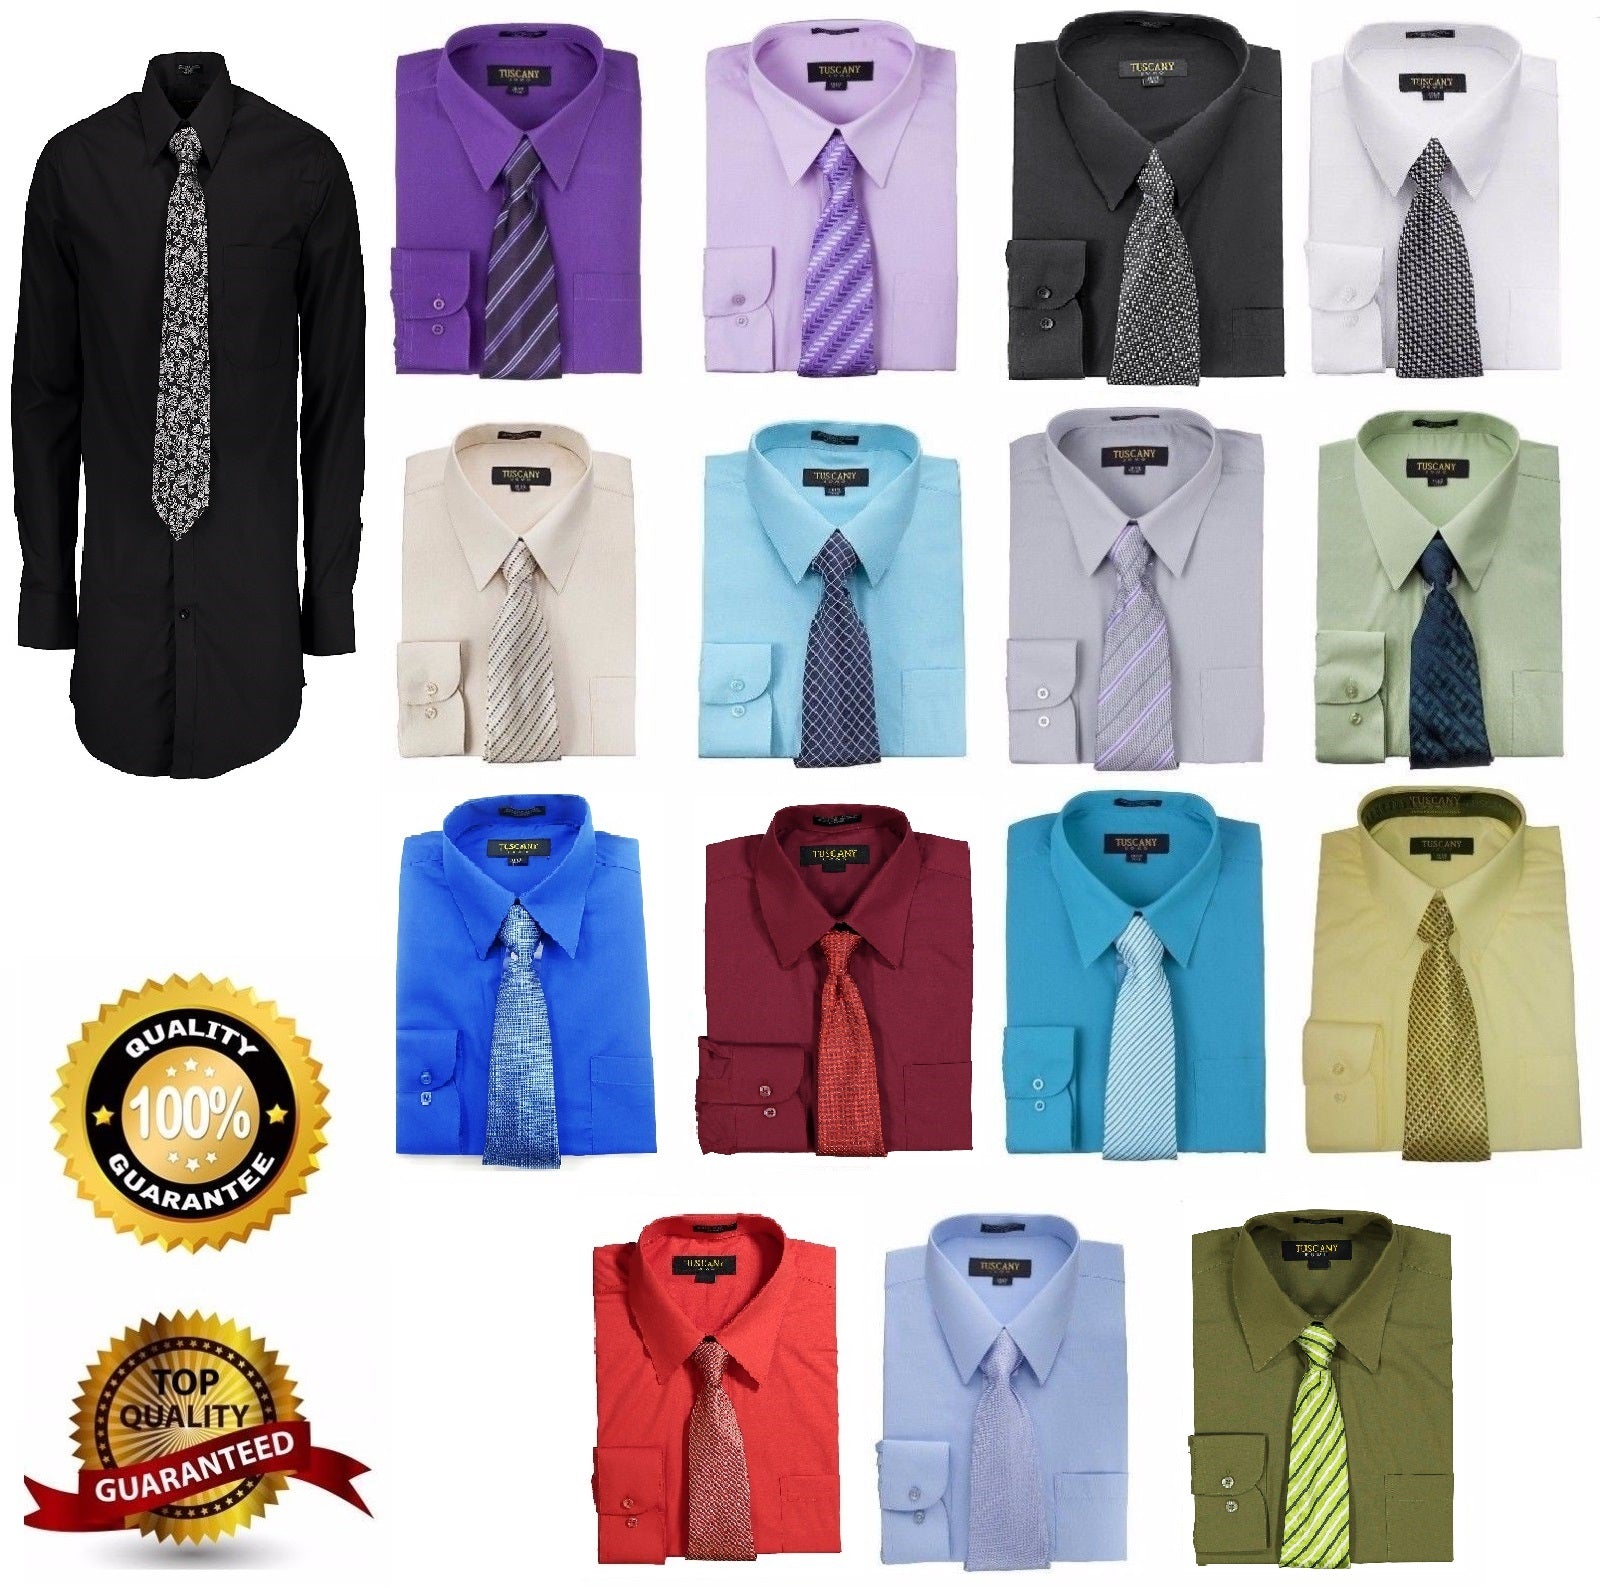 Men's Dress Shirts With Matching Tie Set Cotton Blend Shirt with ...